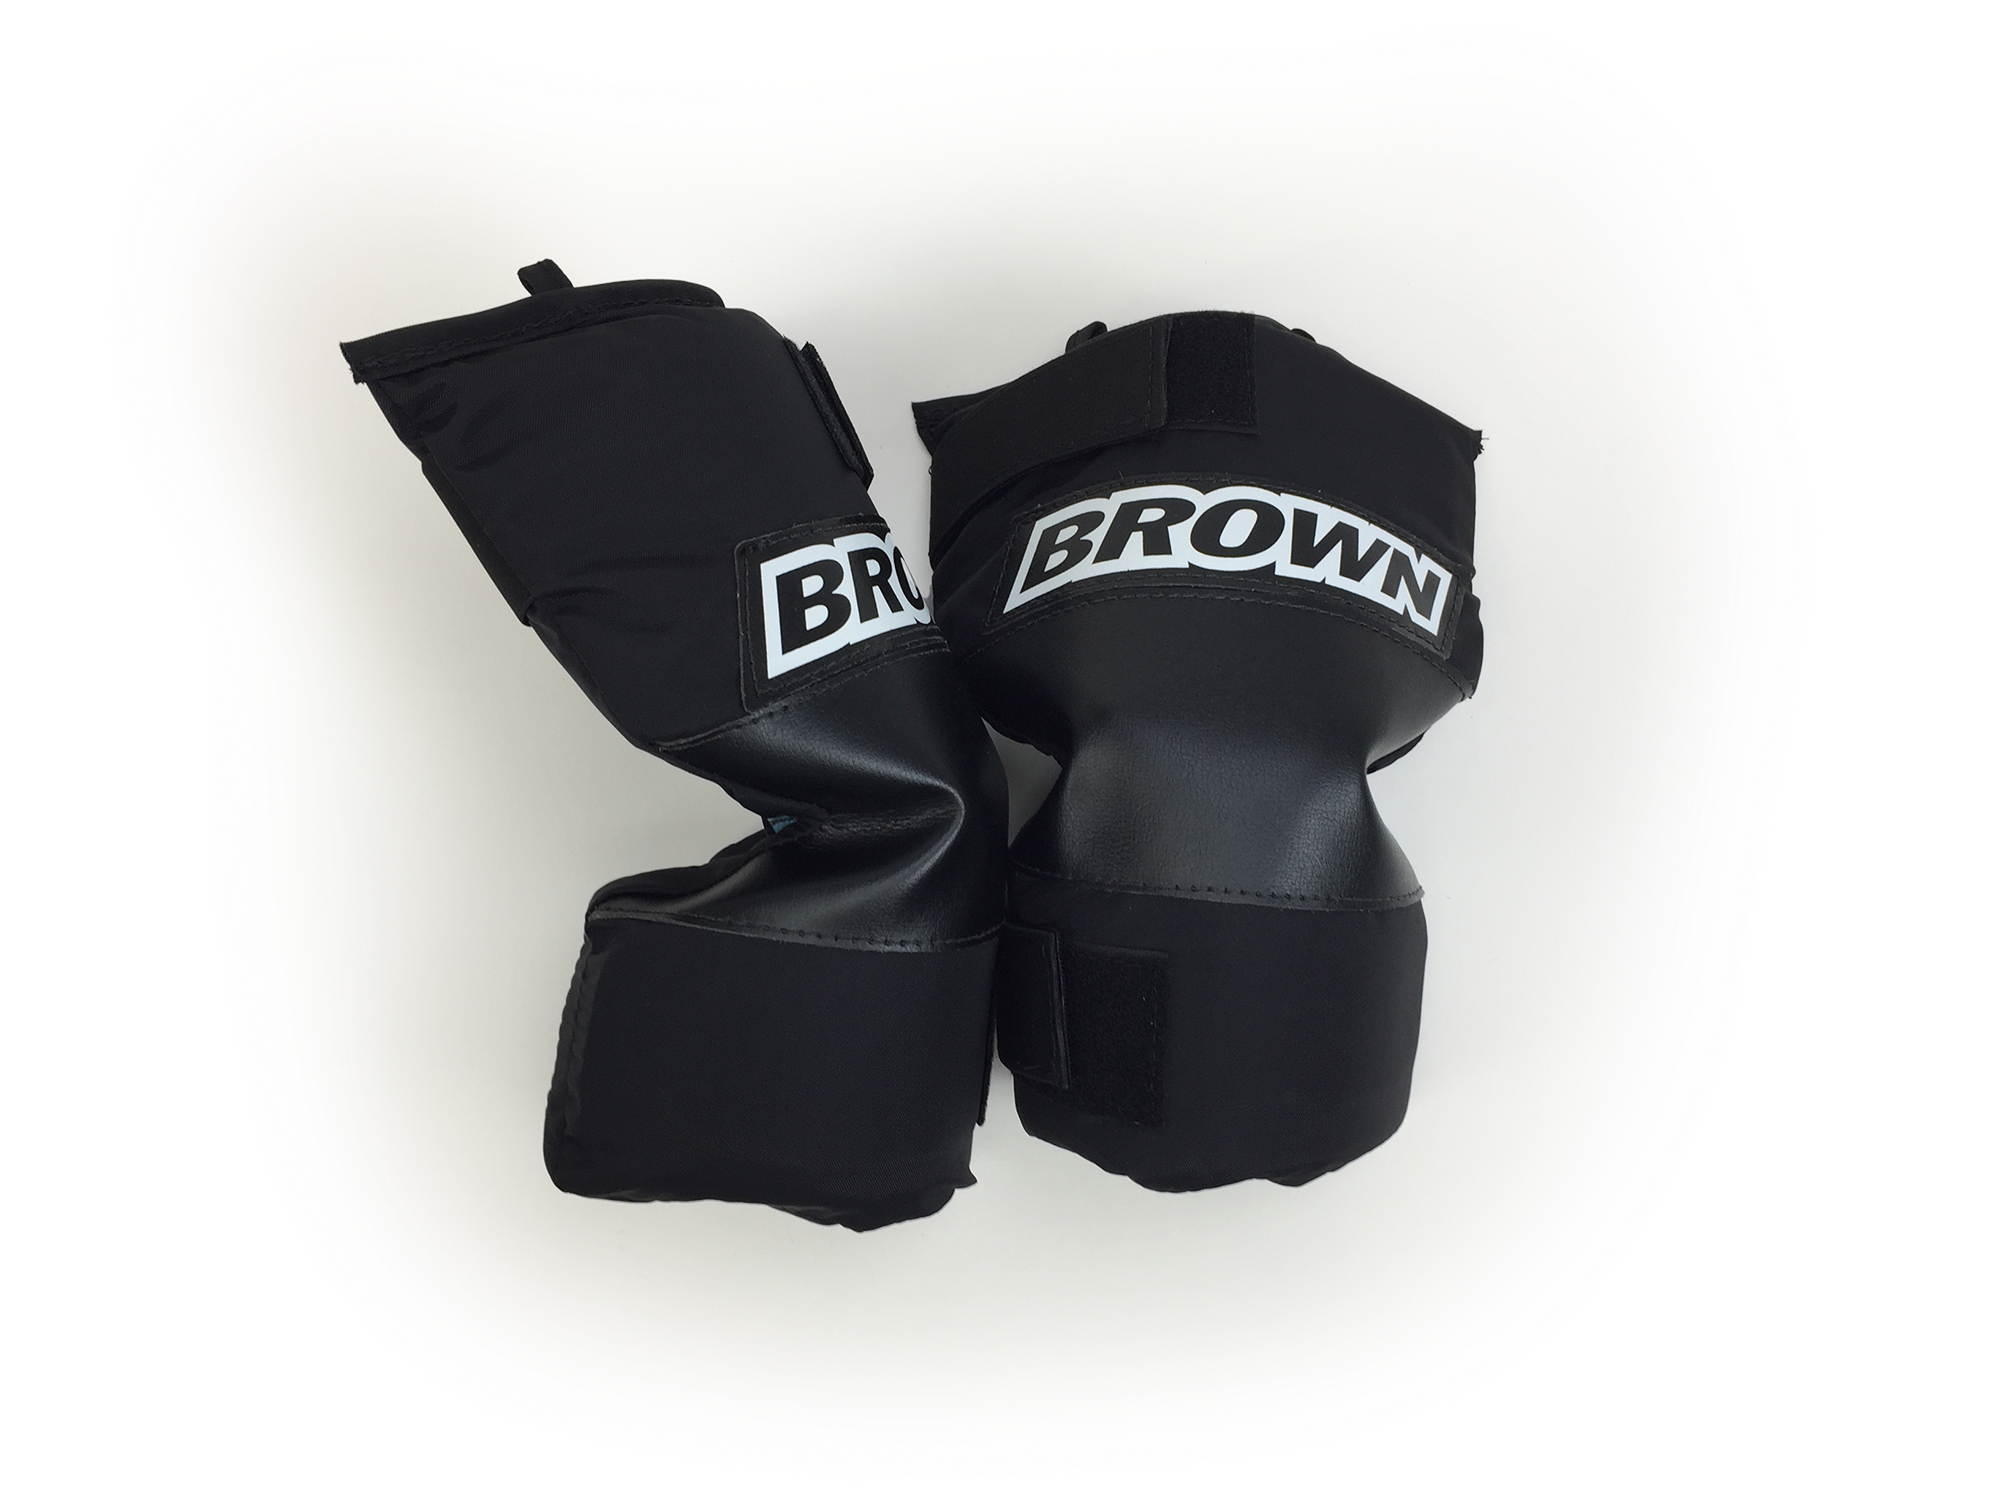 2500 knee pads front and side